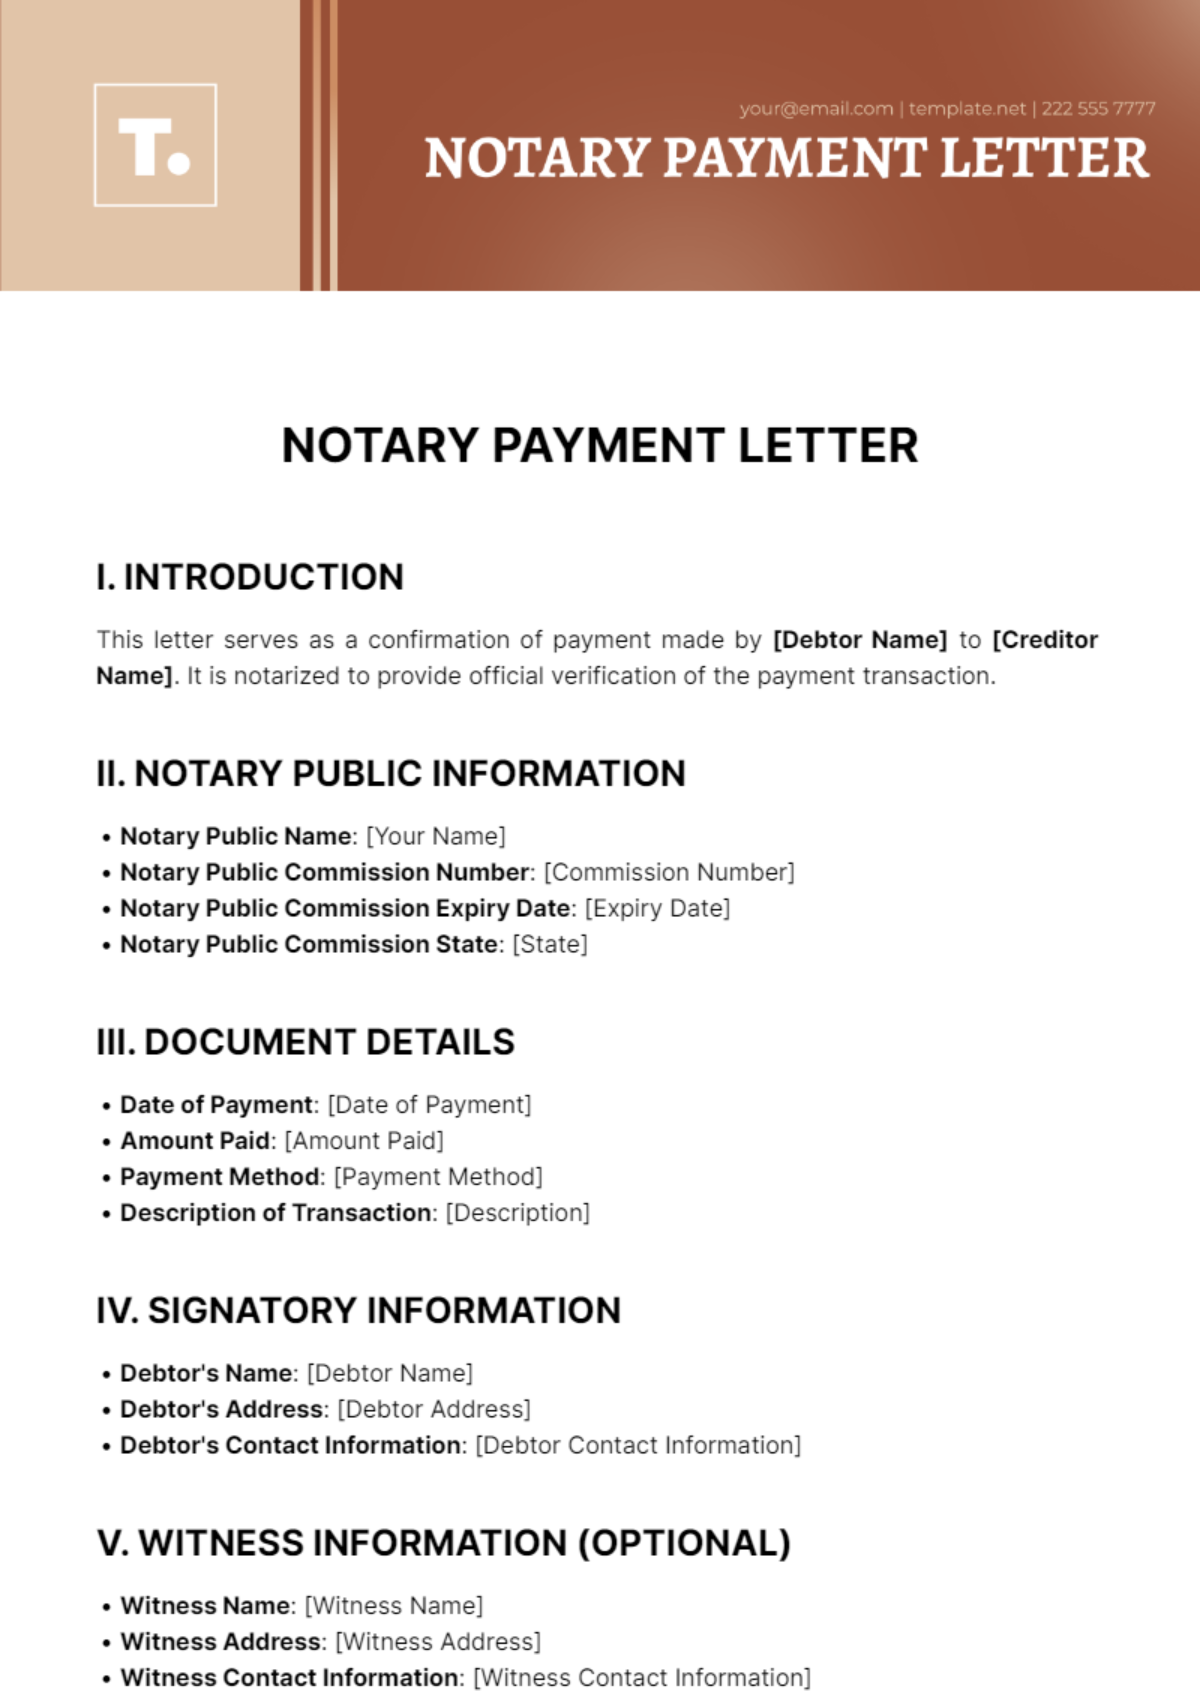 Notary Payment Letter Template